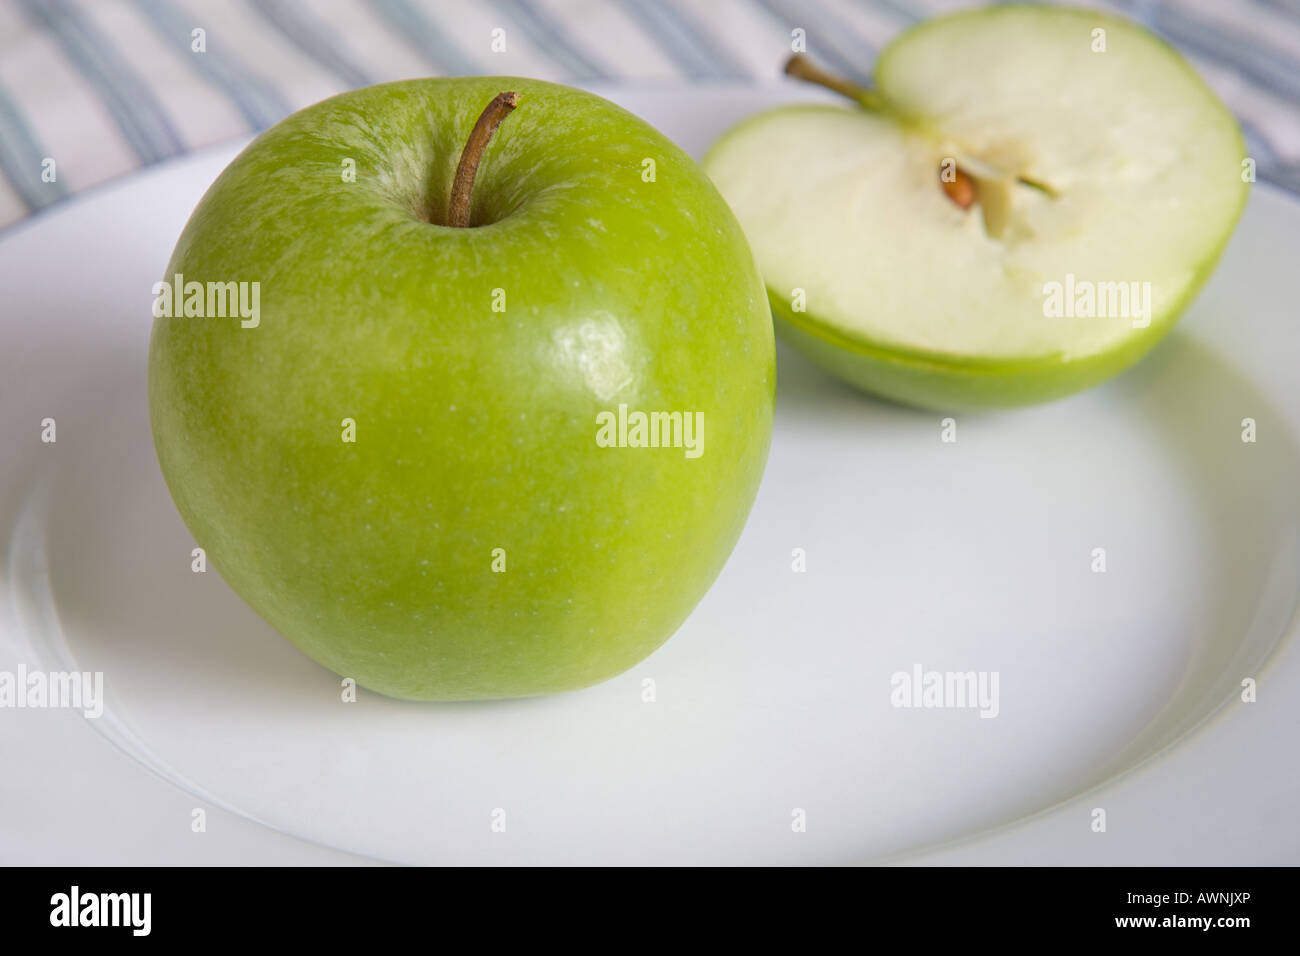 Green apple on a plate Stock Photo